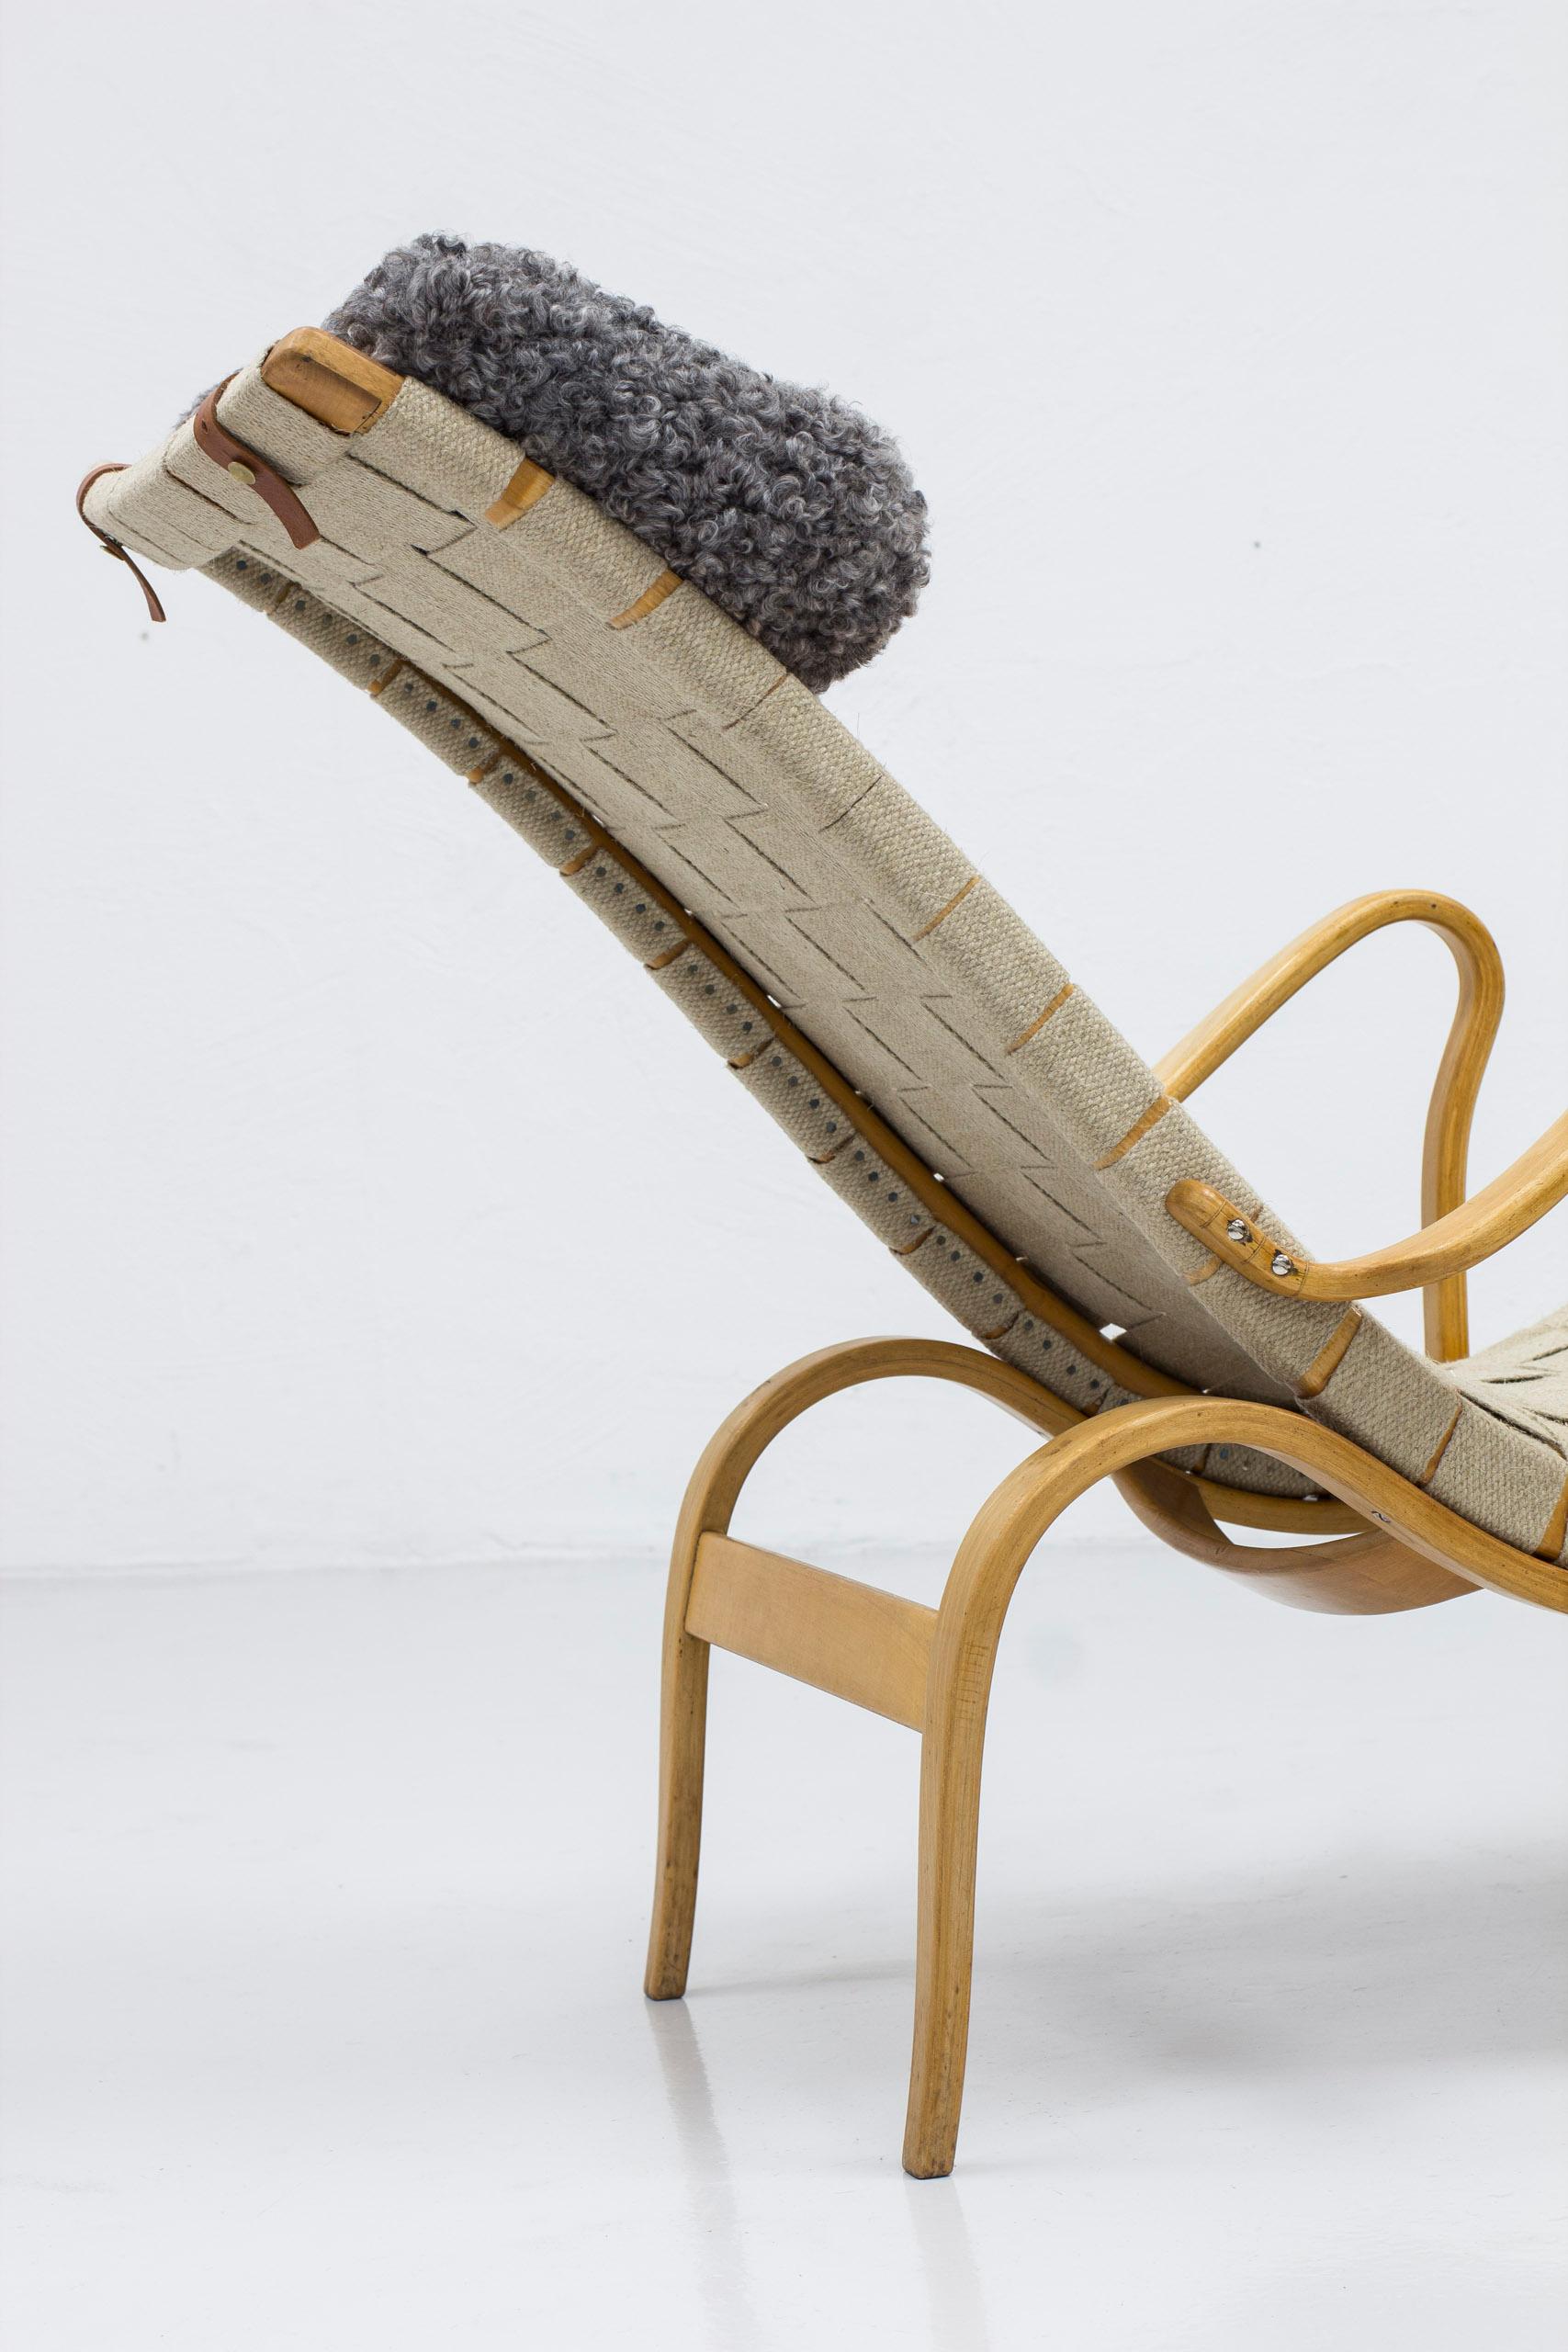 Model 36 chaise longues by Bruno Mathsson for Firma Karl Mathsson 1940s Sweden For Sale 1